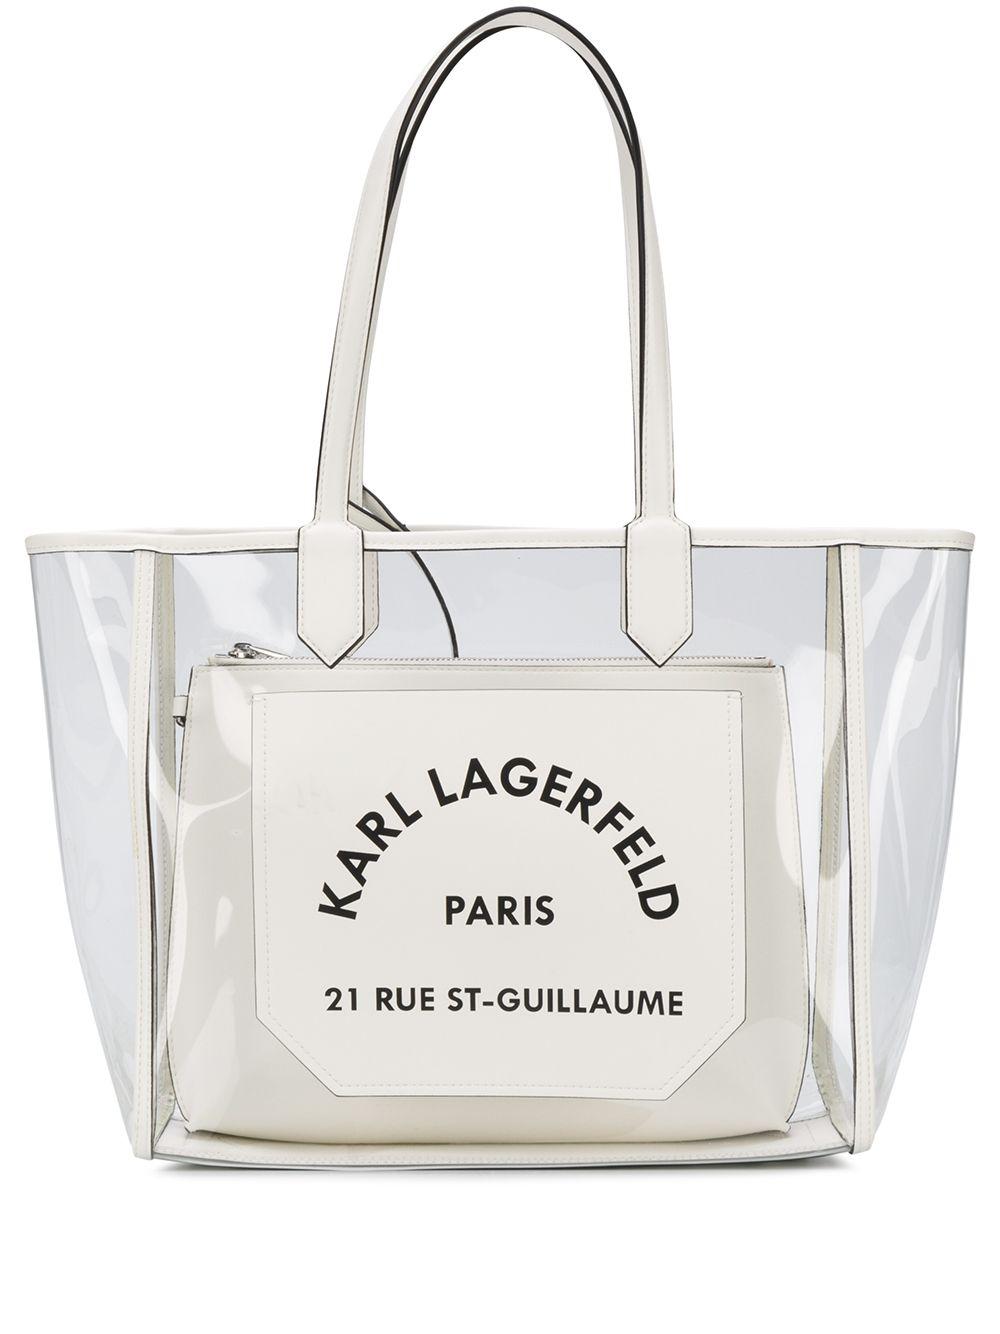 Karl Lagerfeld K/journey Transparent Tote in White